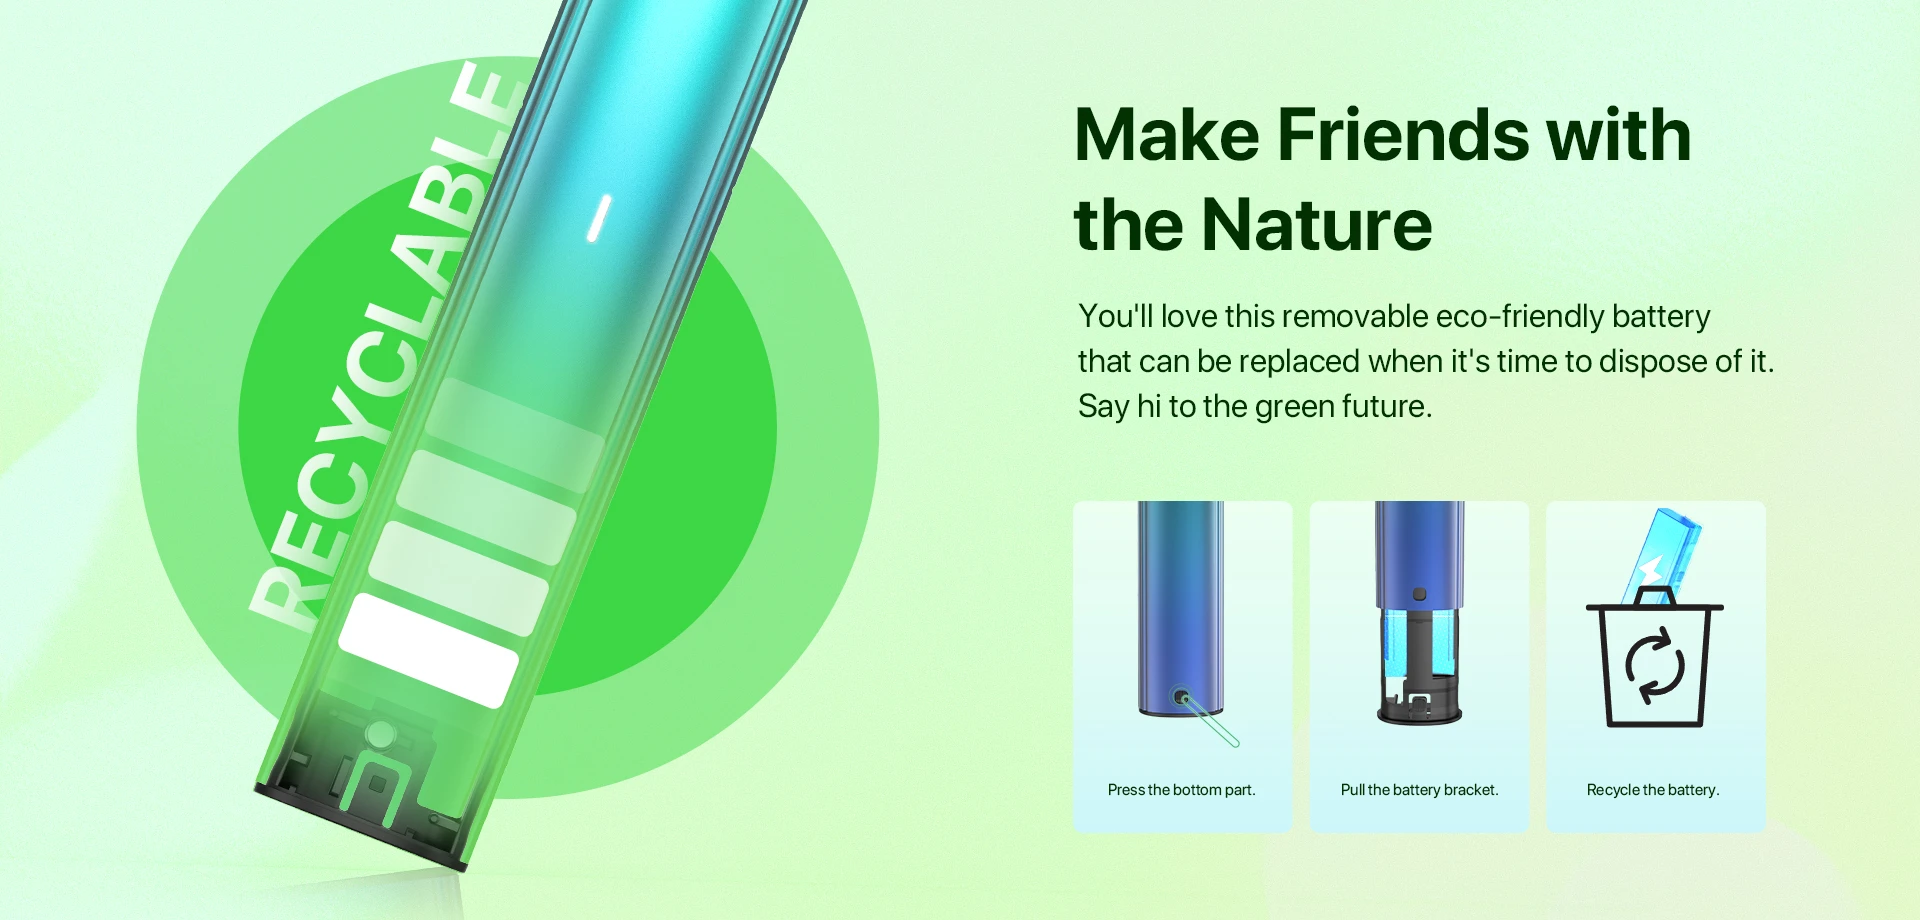 Make Friends with the Nature You'll love this removable eco-friendly battery that can be replaced when it's time to dispose of it. Say hi to the green future.  Pressthe bottom part. Pull the battery bracket. Recycle the battery.